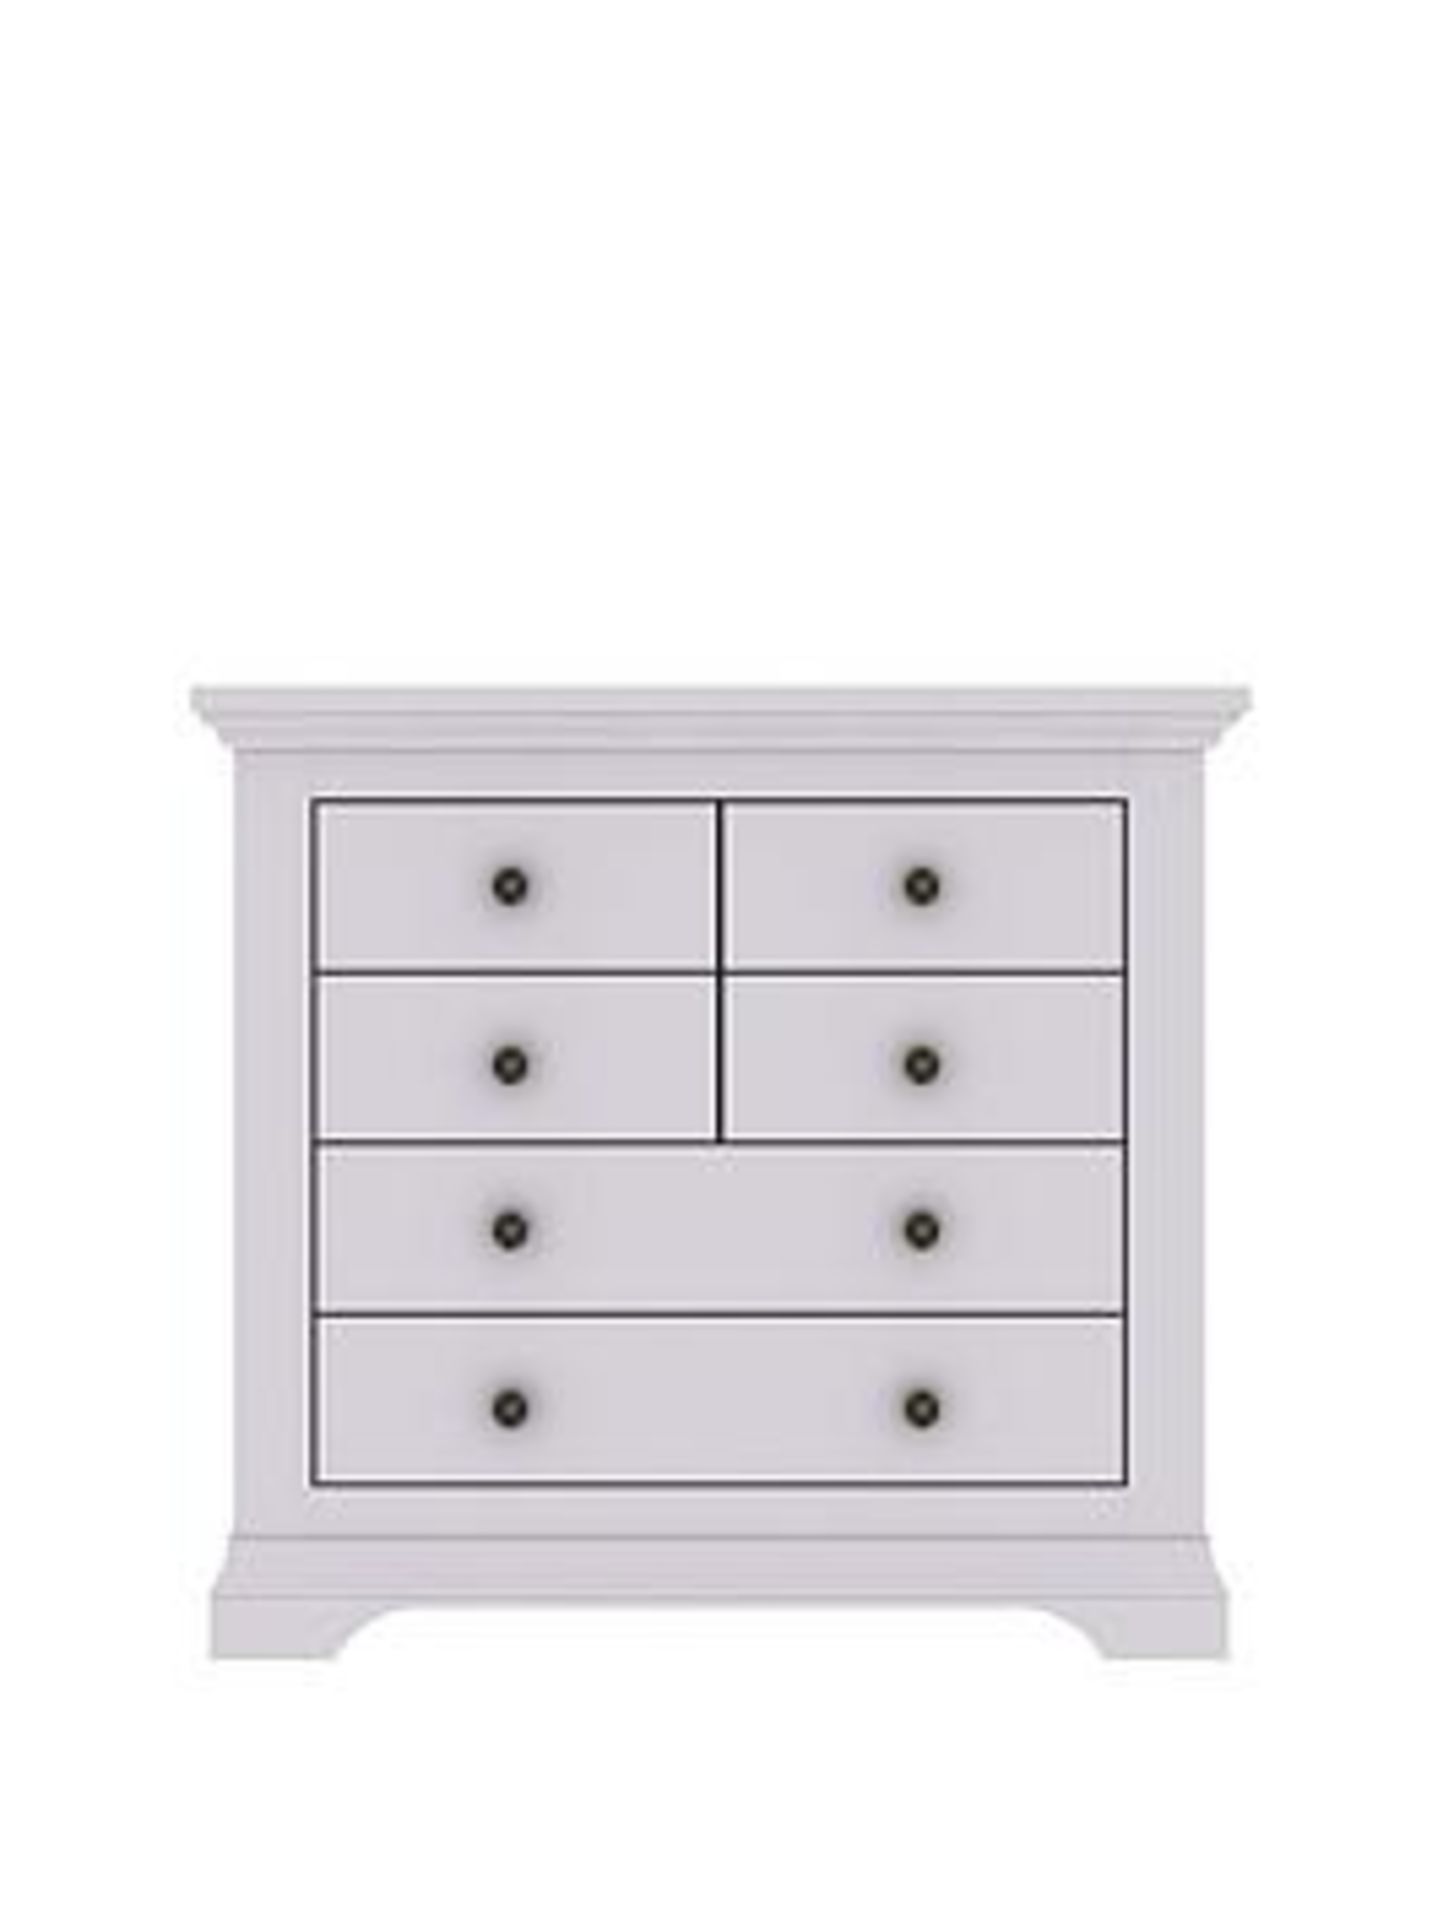 Boxed Item Ideal Home Normandy 6 Drawers Chest [Grey] 92X100X42Cm Rrp:£466.0 - Image 2 of 2